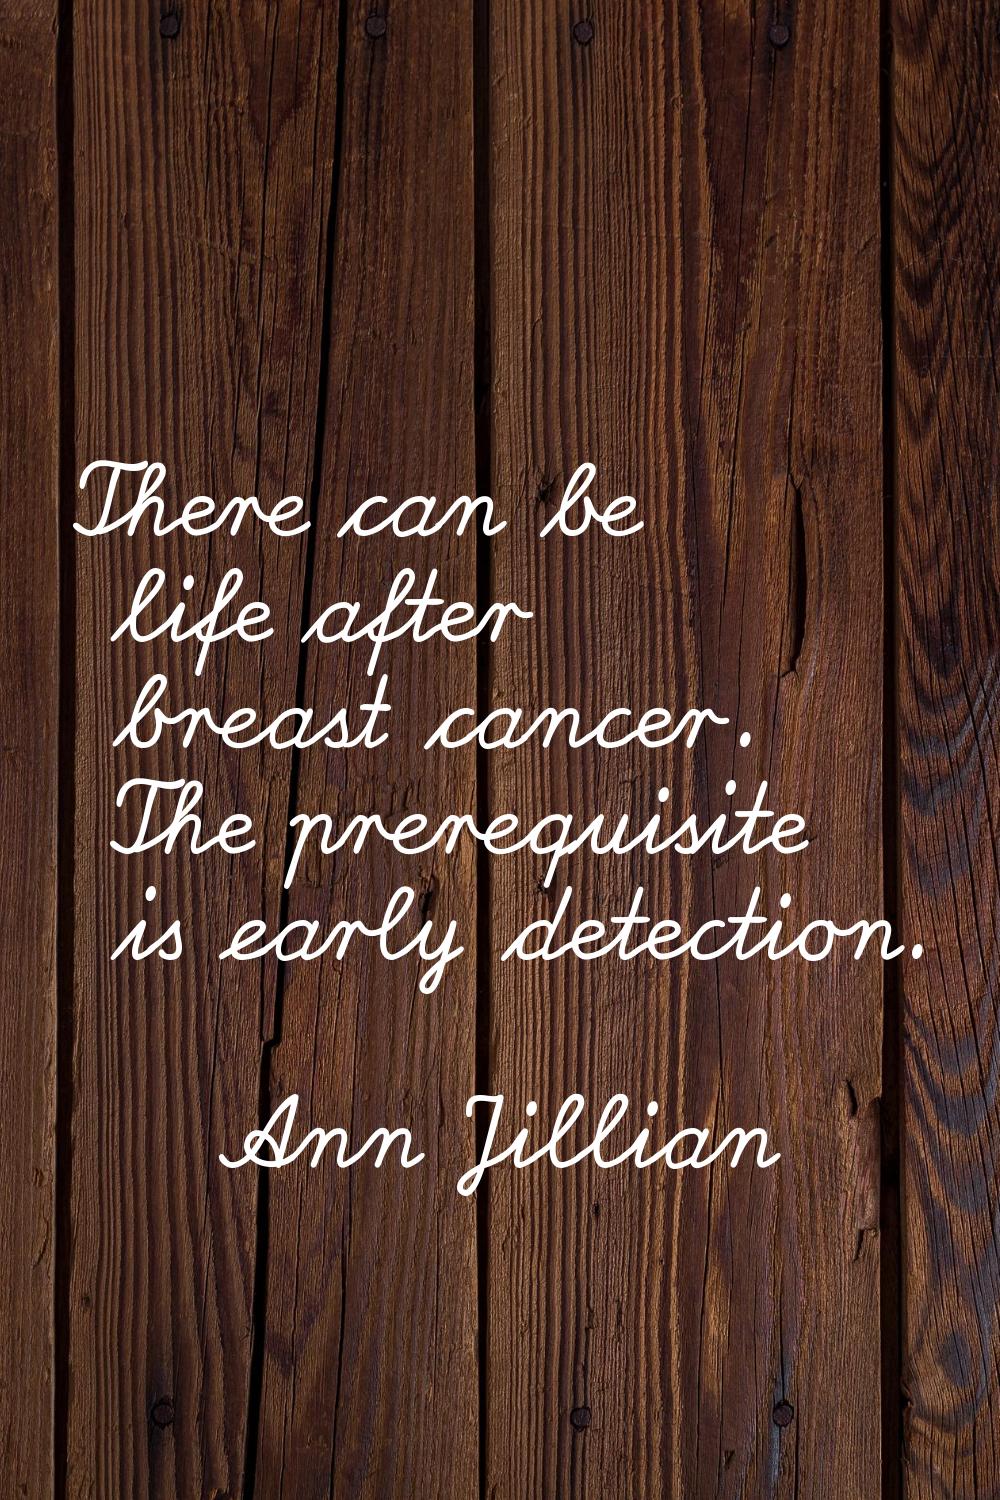 There can be life after breast cancer. The prerequisite is early detection.